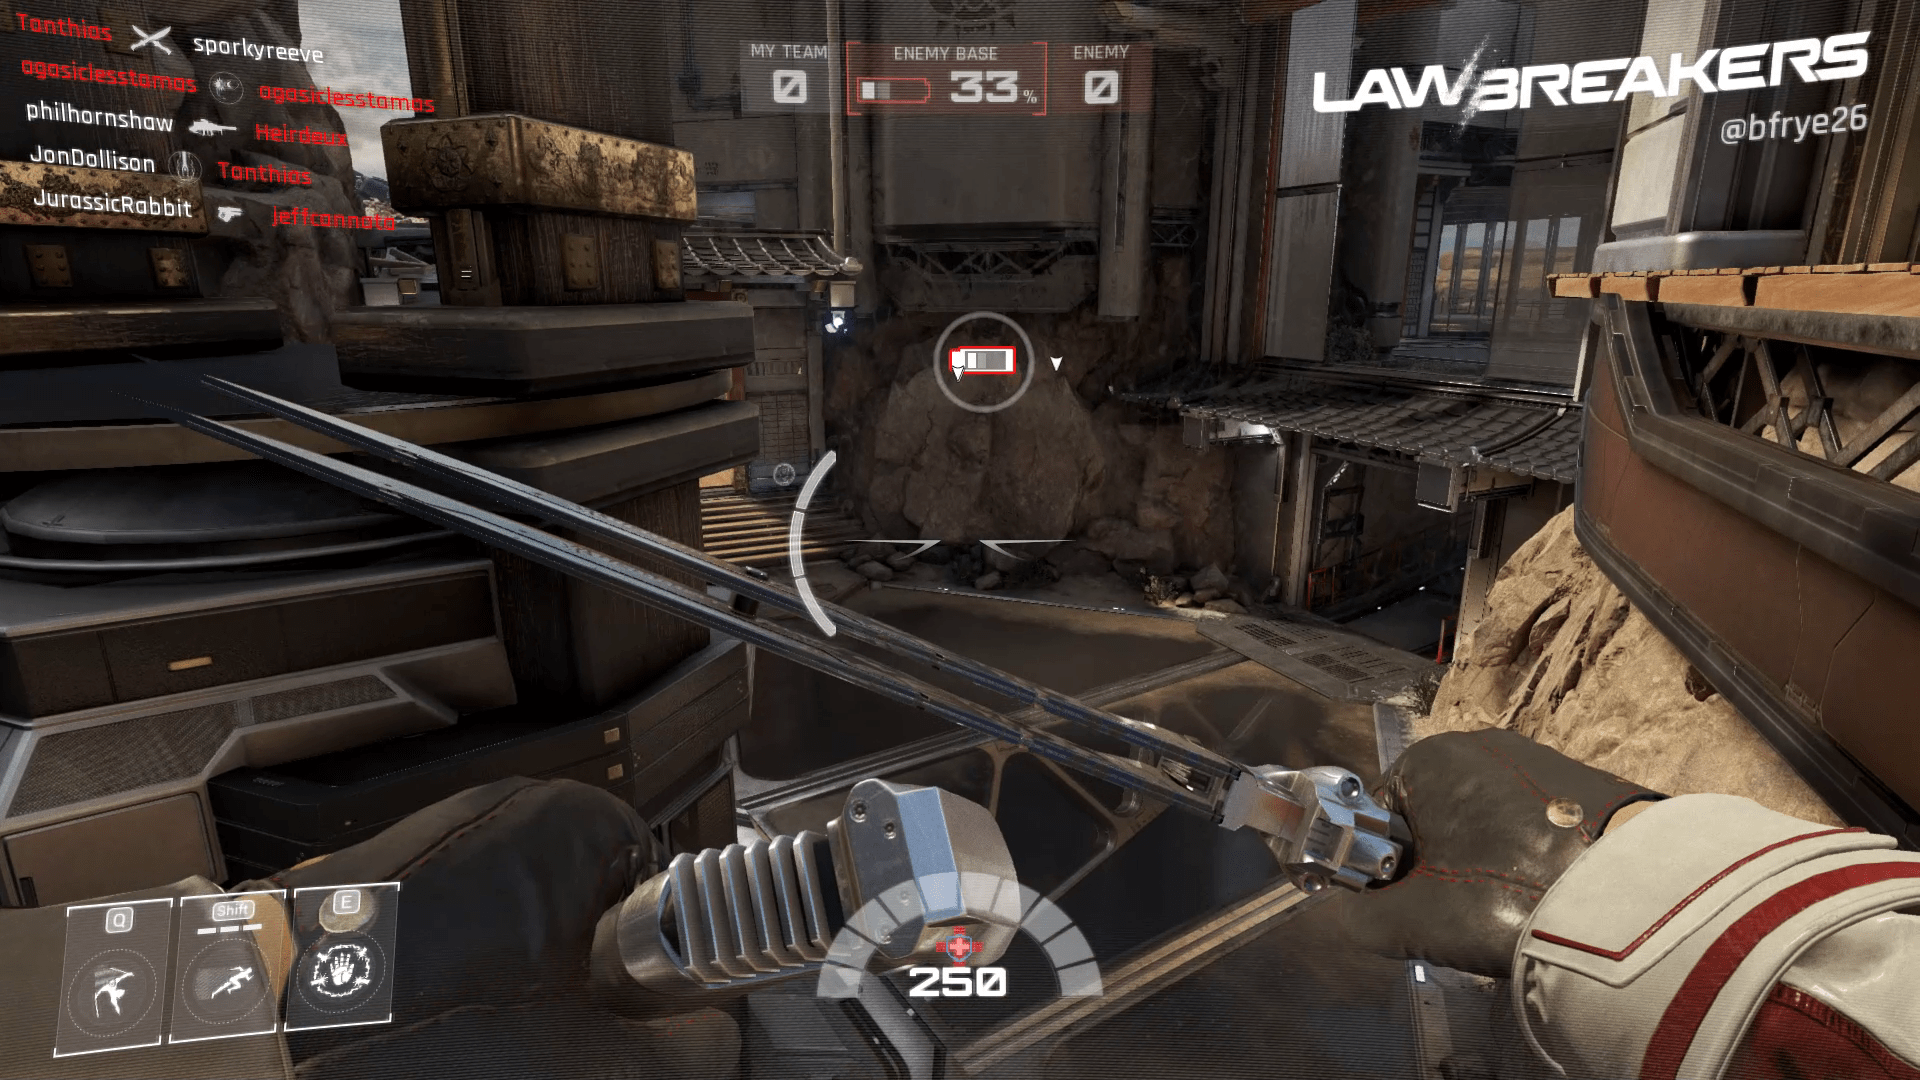 Lawbreakers Preview: The Pc Shooter Is Back 4